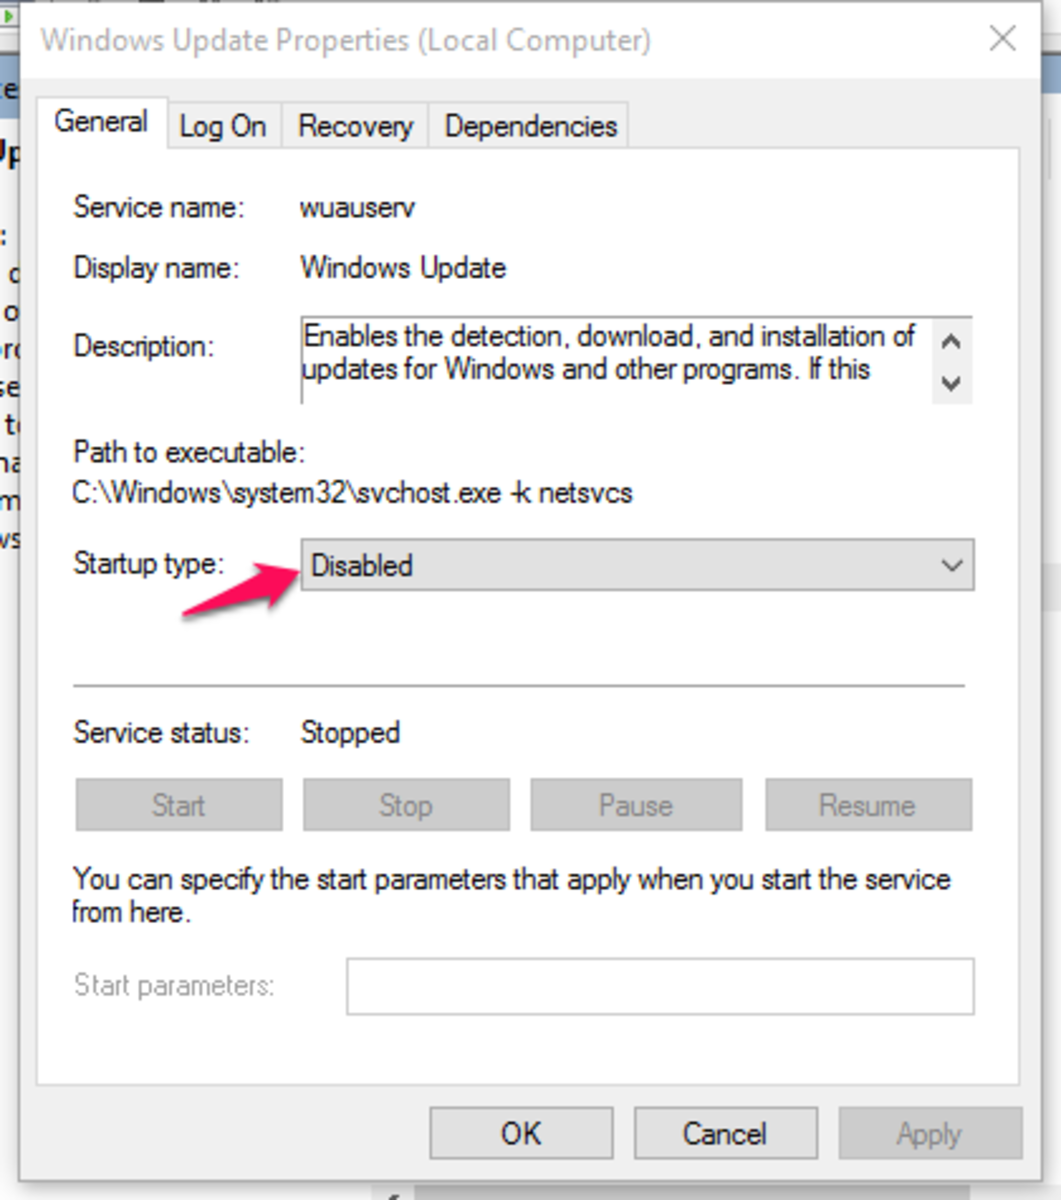 Turn Startup type to Disabled to disable automatic Windows updates.